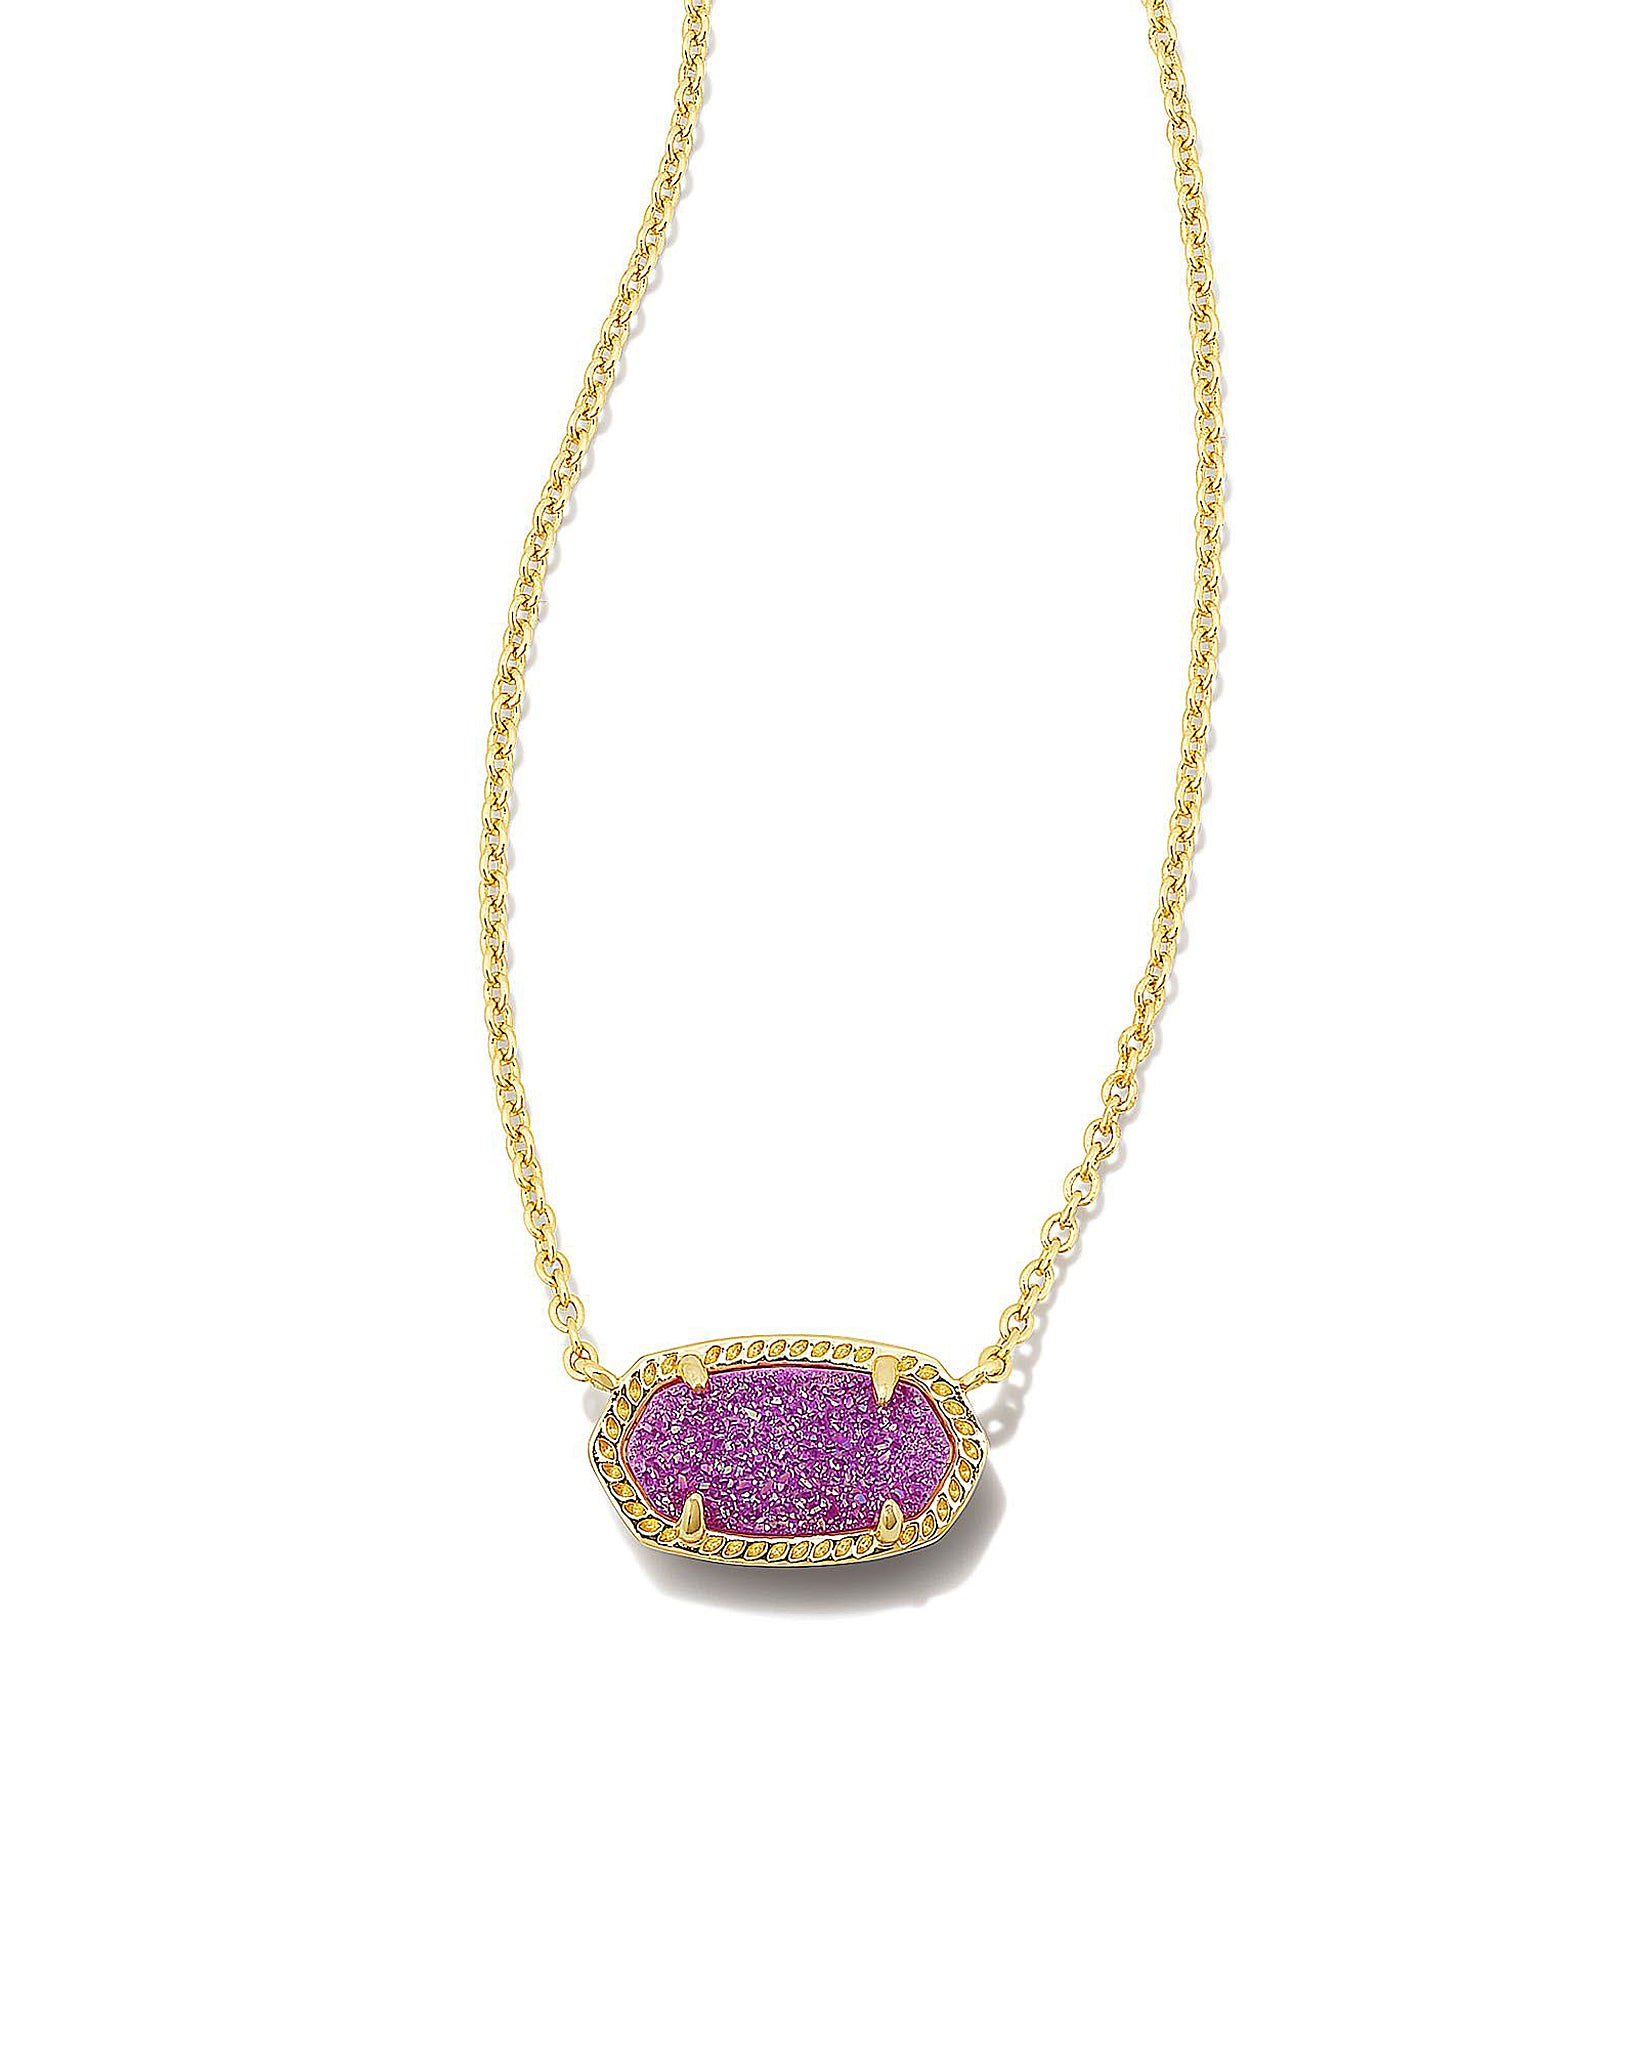 Kendra Scott Elisa Oval Pendant Necklace in Mulberry Drusy and Gold